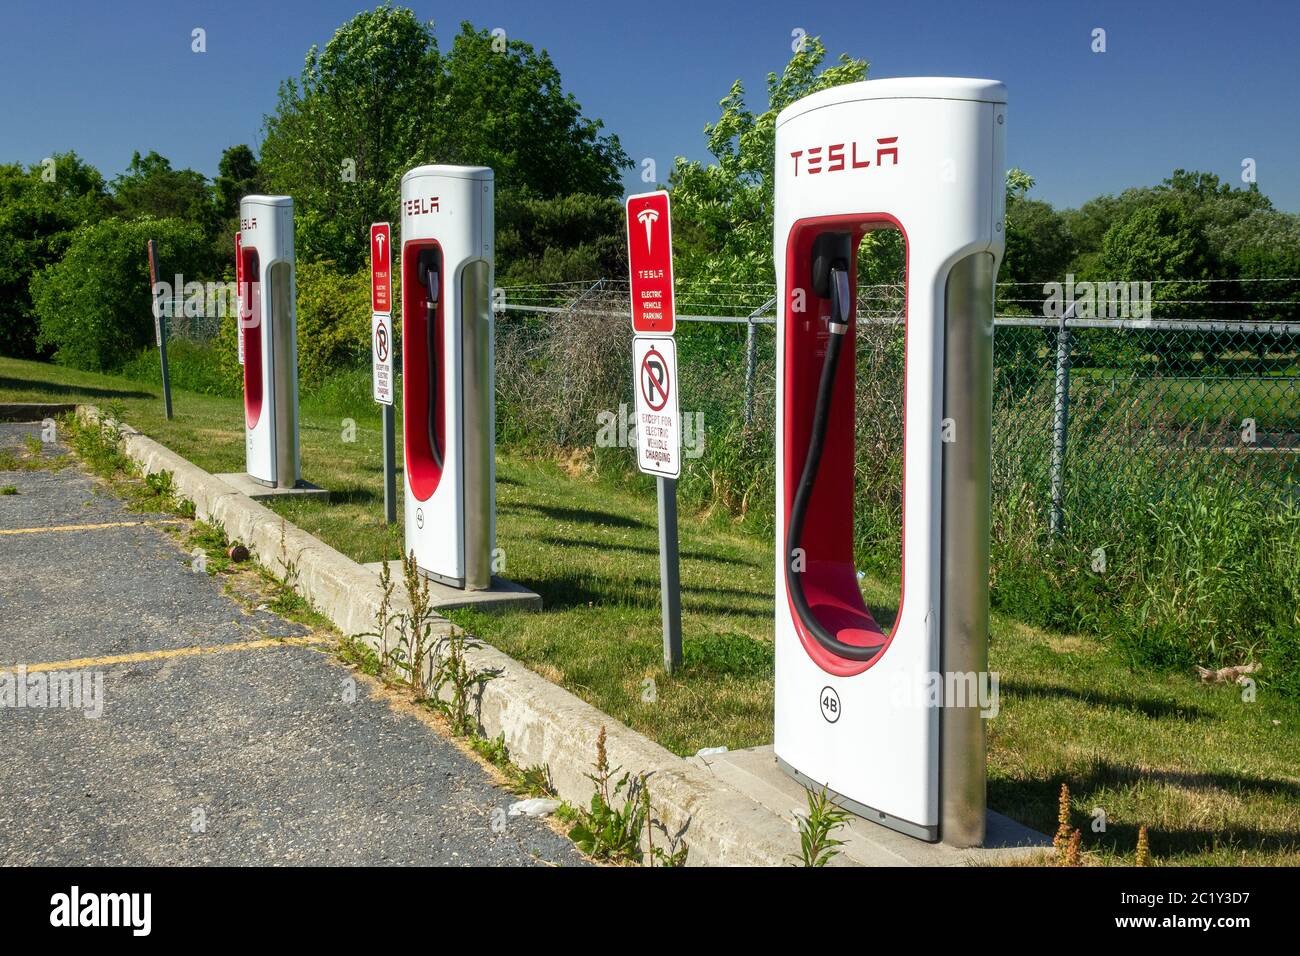 Tesla Electric Car Charging Station Supercharging Network In Woodstock Ontario Canada Parking Sign Stock Photo